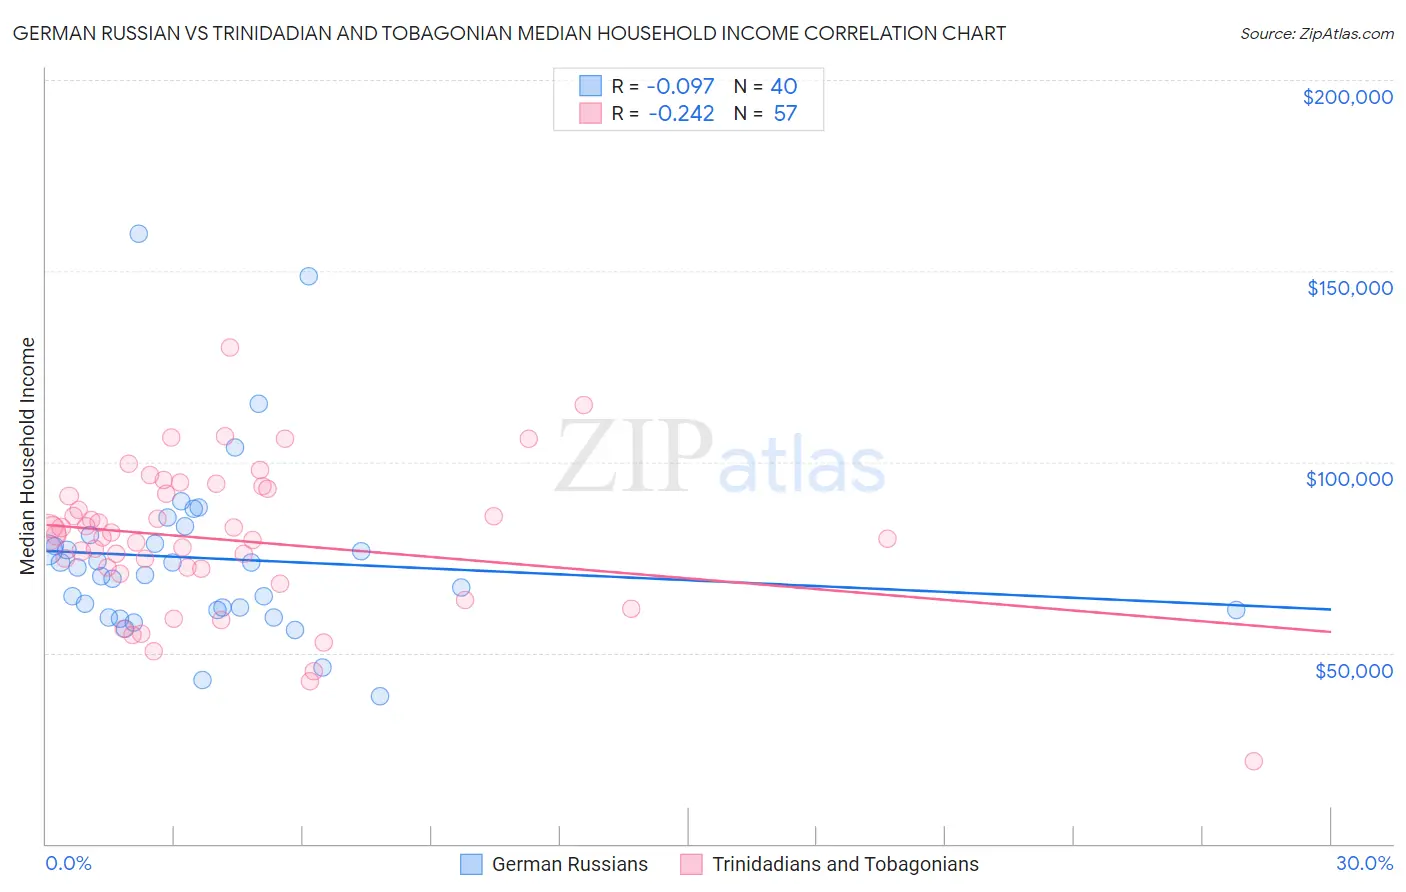 German Russian vs Trinidadian and Tobagonian Median Household Income